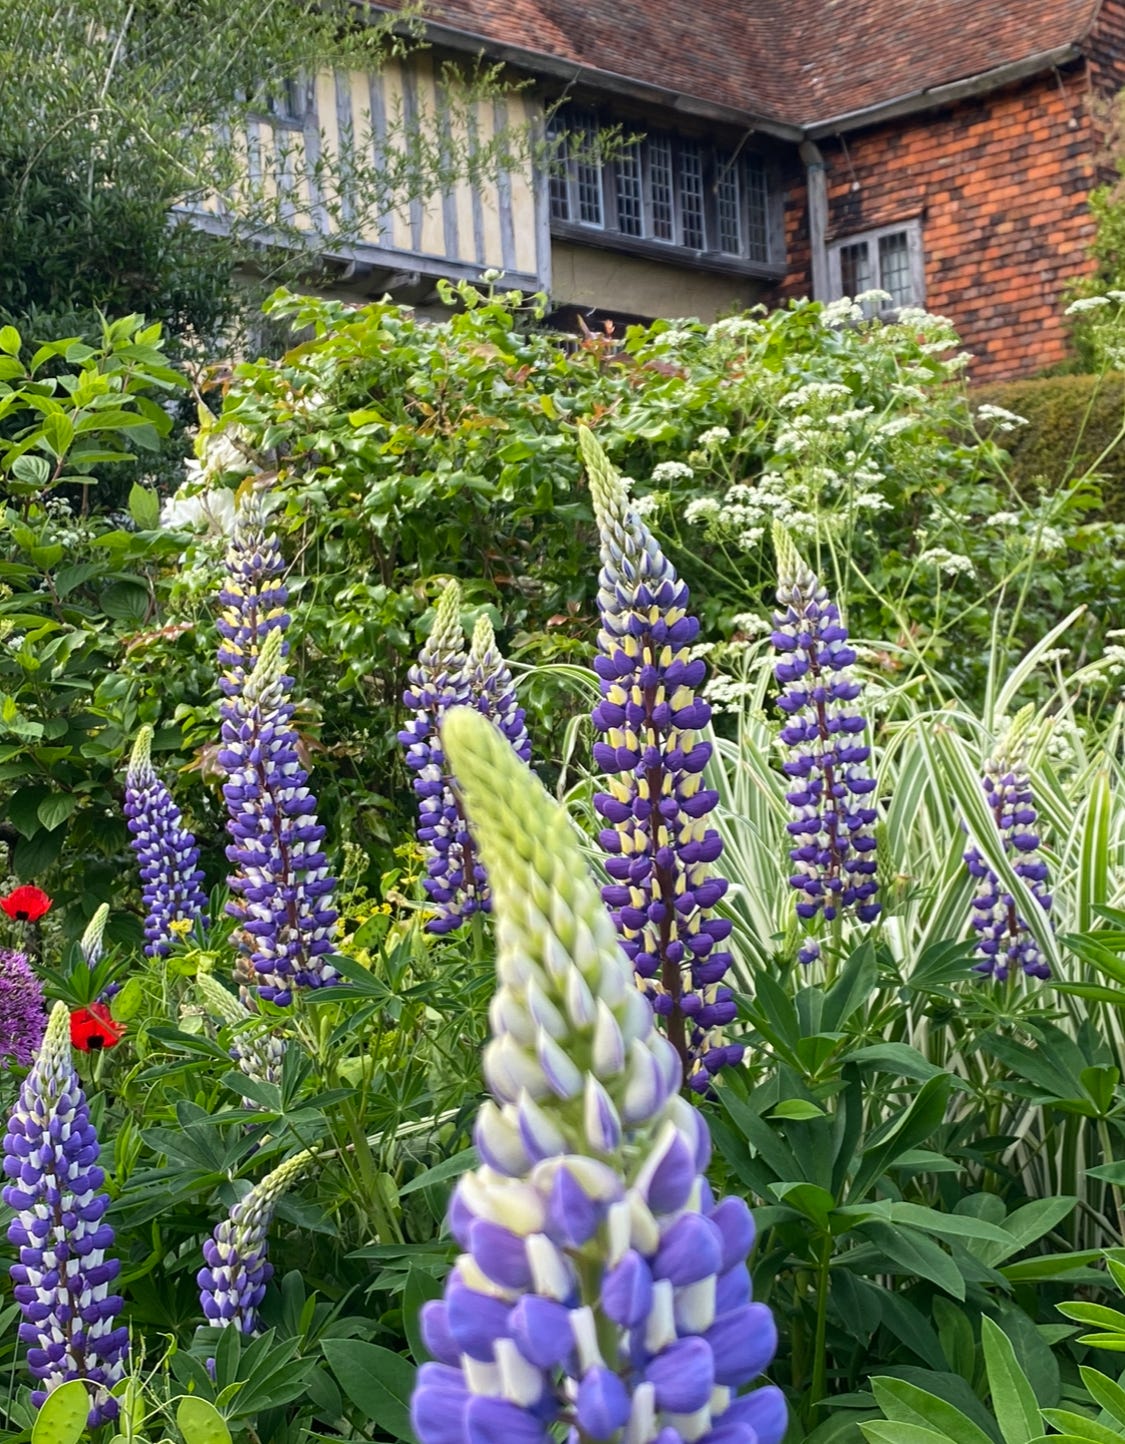 Lupins at Great Dixter. Photo by Leslie Harris